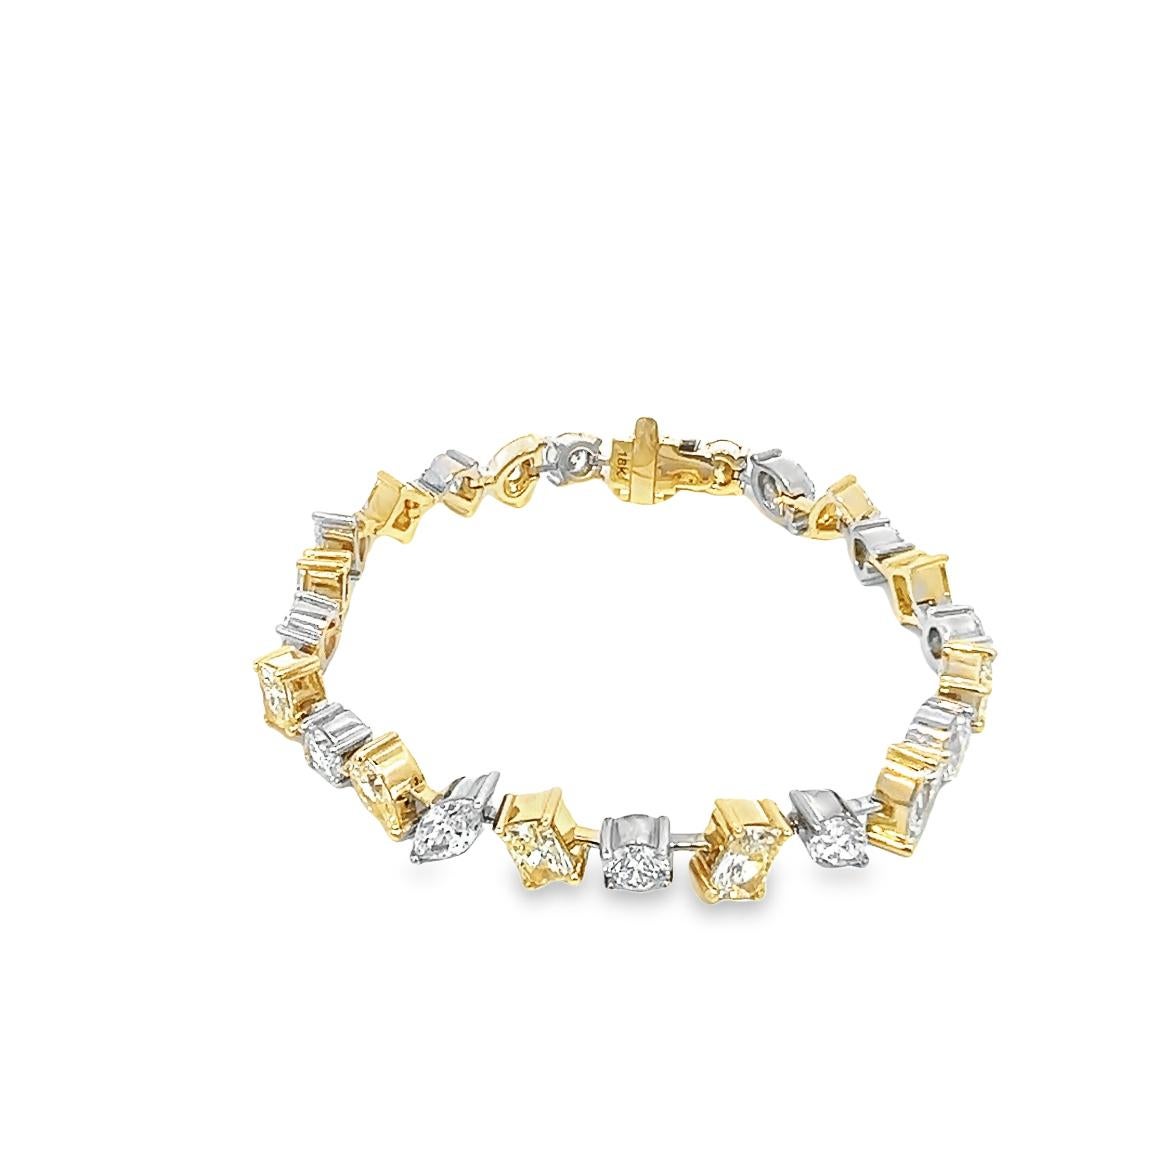 Aesthetic Movement 13.12CT Total weight  Natural Multi-shape Diamond Bracelet, Set in 18KY/W Gold For Sale